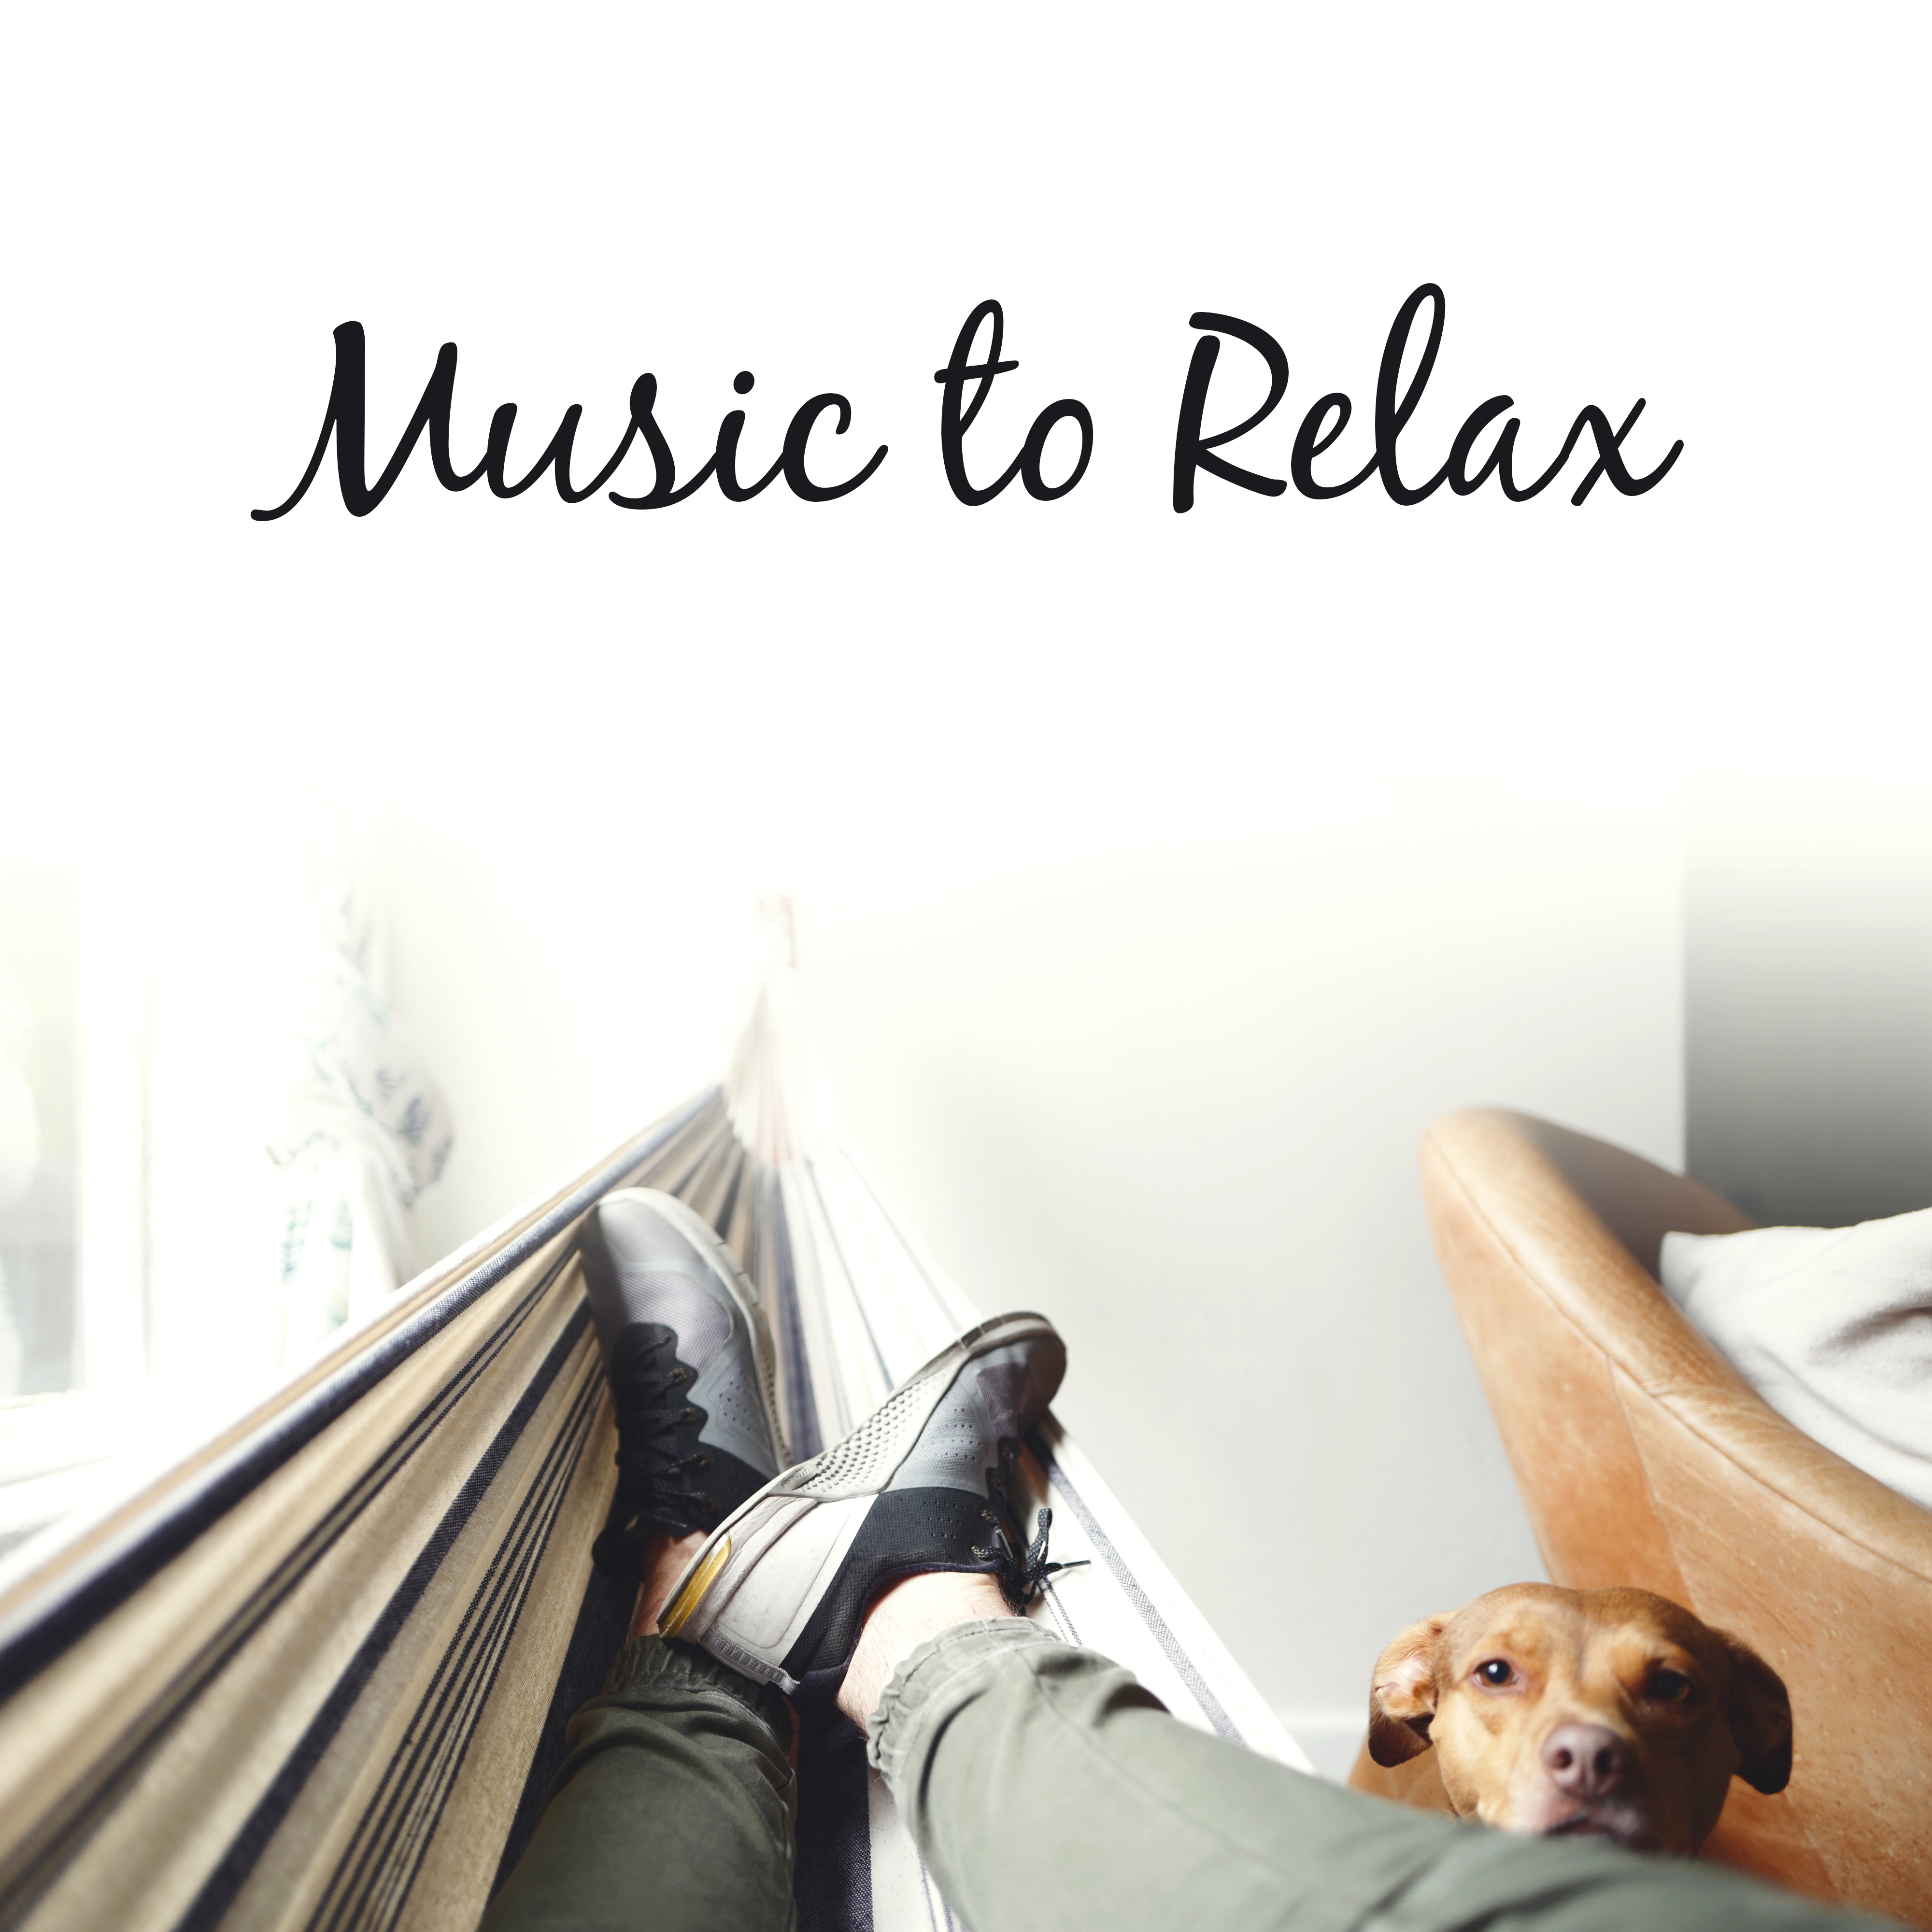 Music to Relax – New Age Sounds to Rest, Mind & Body Relaxation, Stress Relief, Peaceful Music